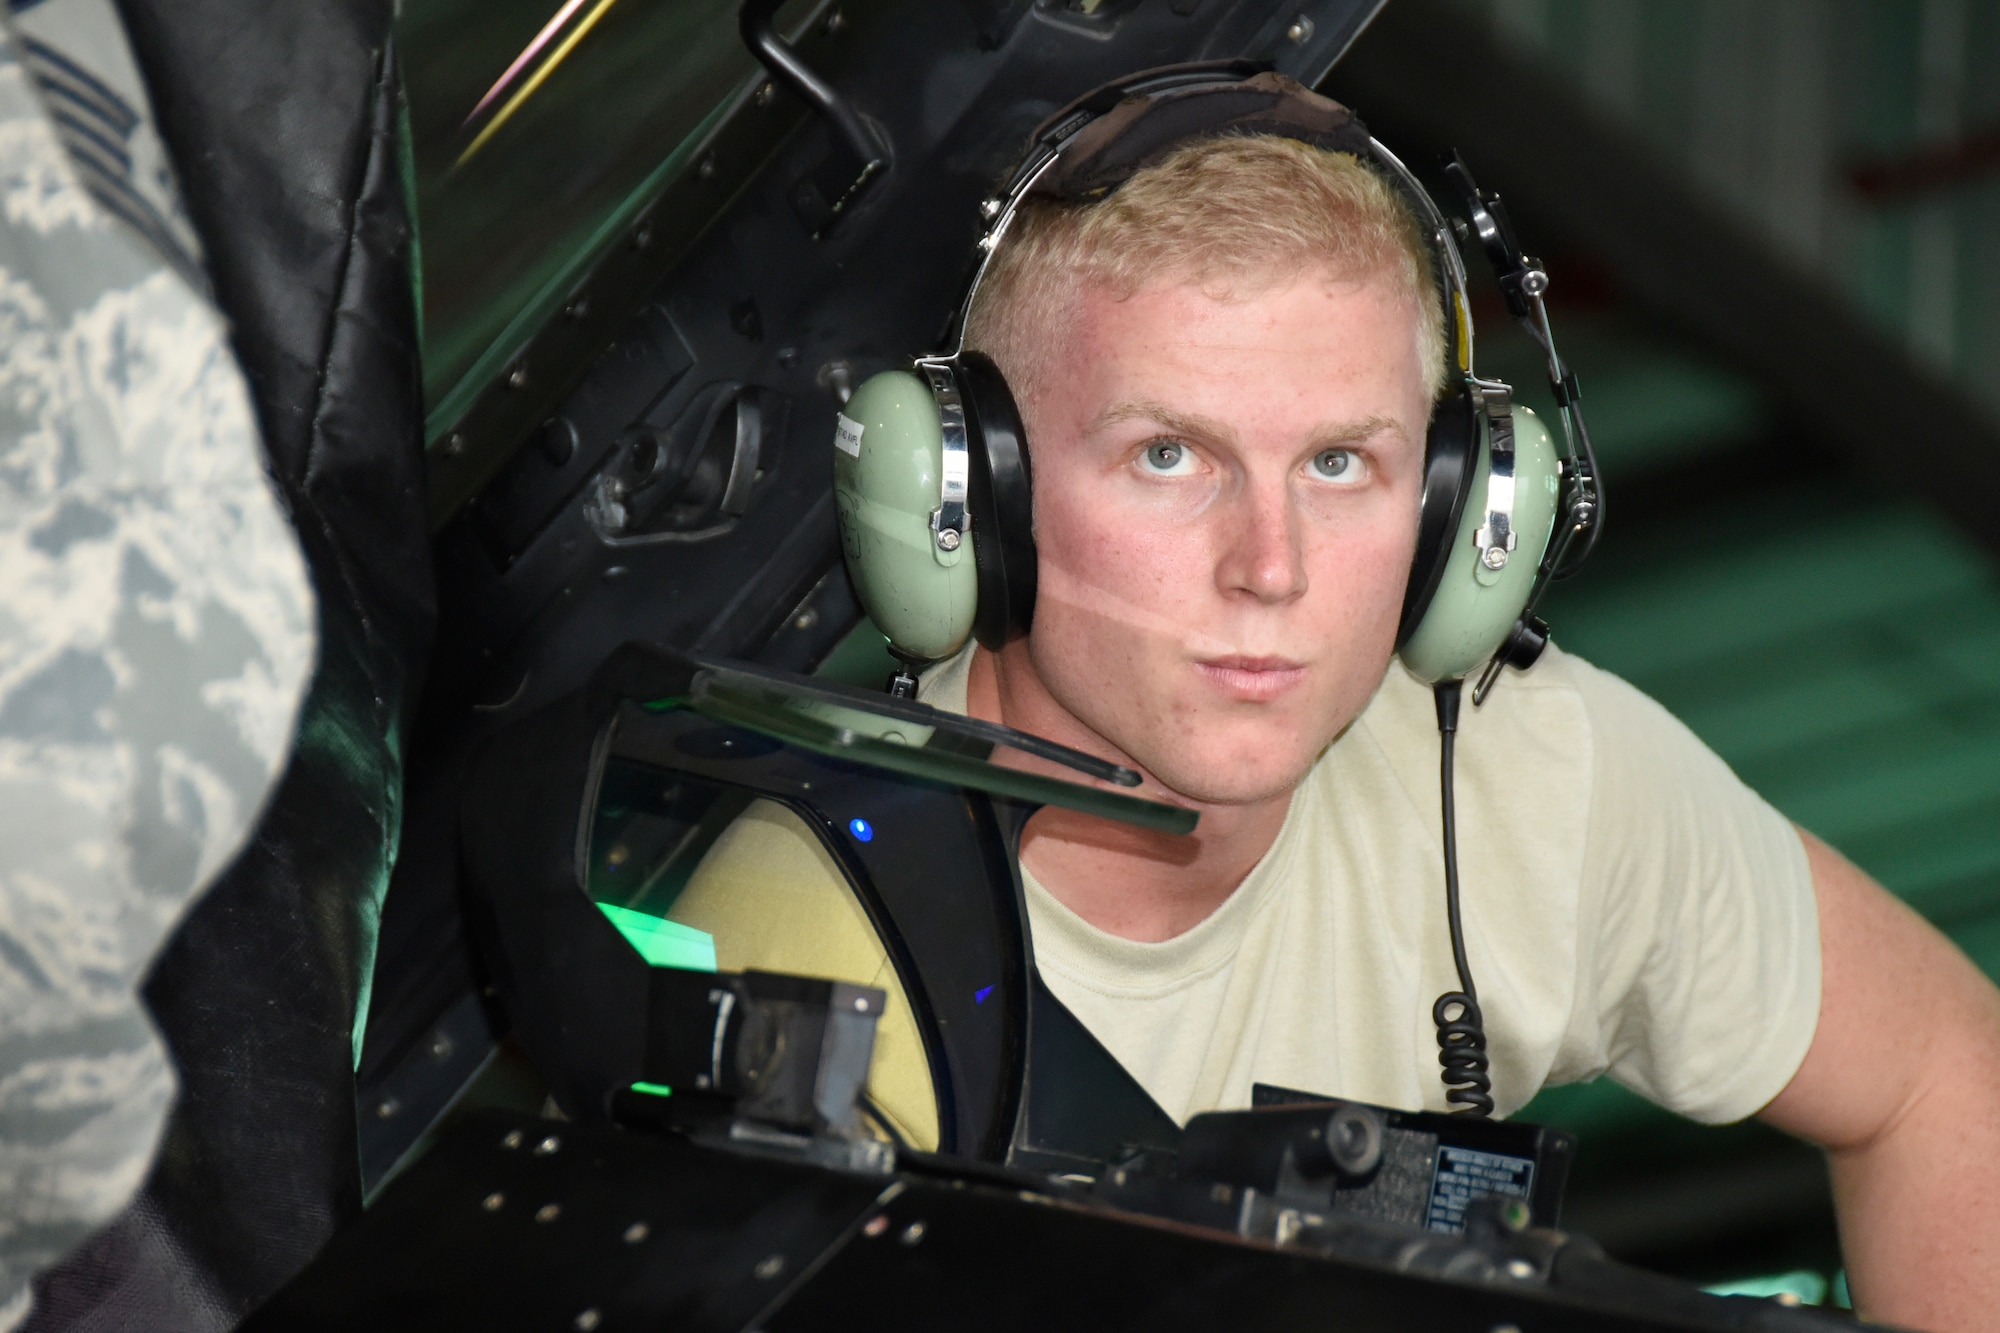 SAVANNAH CRTC, GA - Senior Airman Eric Hunstad, 114th Maintenance Group avioinics technician, listens intently as he works with other team members on an F-16 aircraft during Sentry Savannah 16-1 Feb.3, 2016. The 114th Fighter Wing deployed to Savannah CRTC to participate in the exercise with other Active Duty and Air National Guard units.(U.S. Air National Guard photo by Senior Master Sgt. Nancy Ausland/Released)